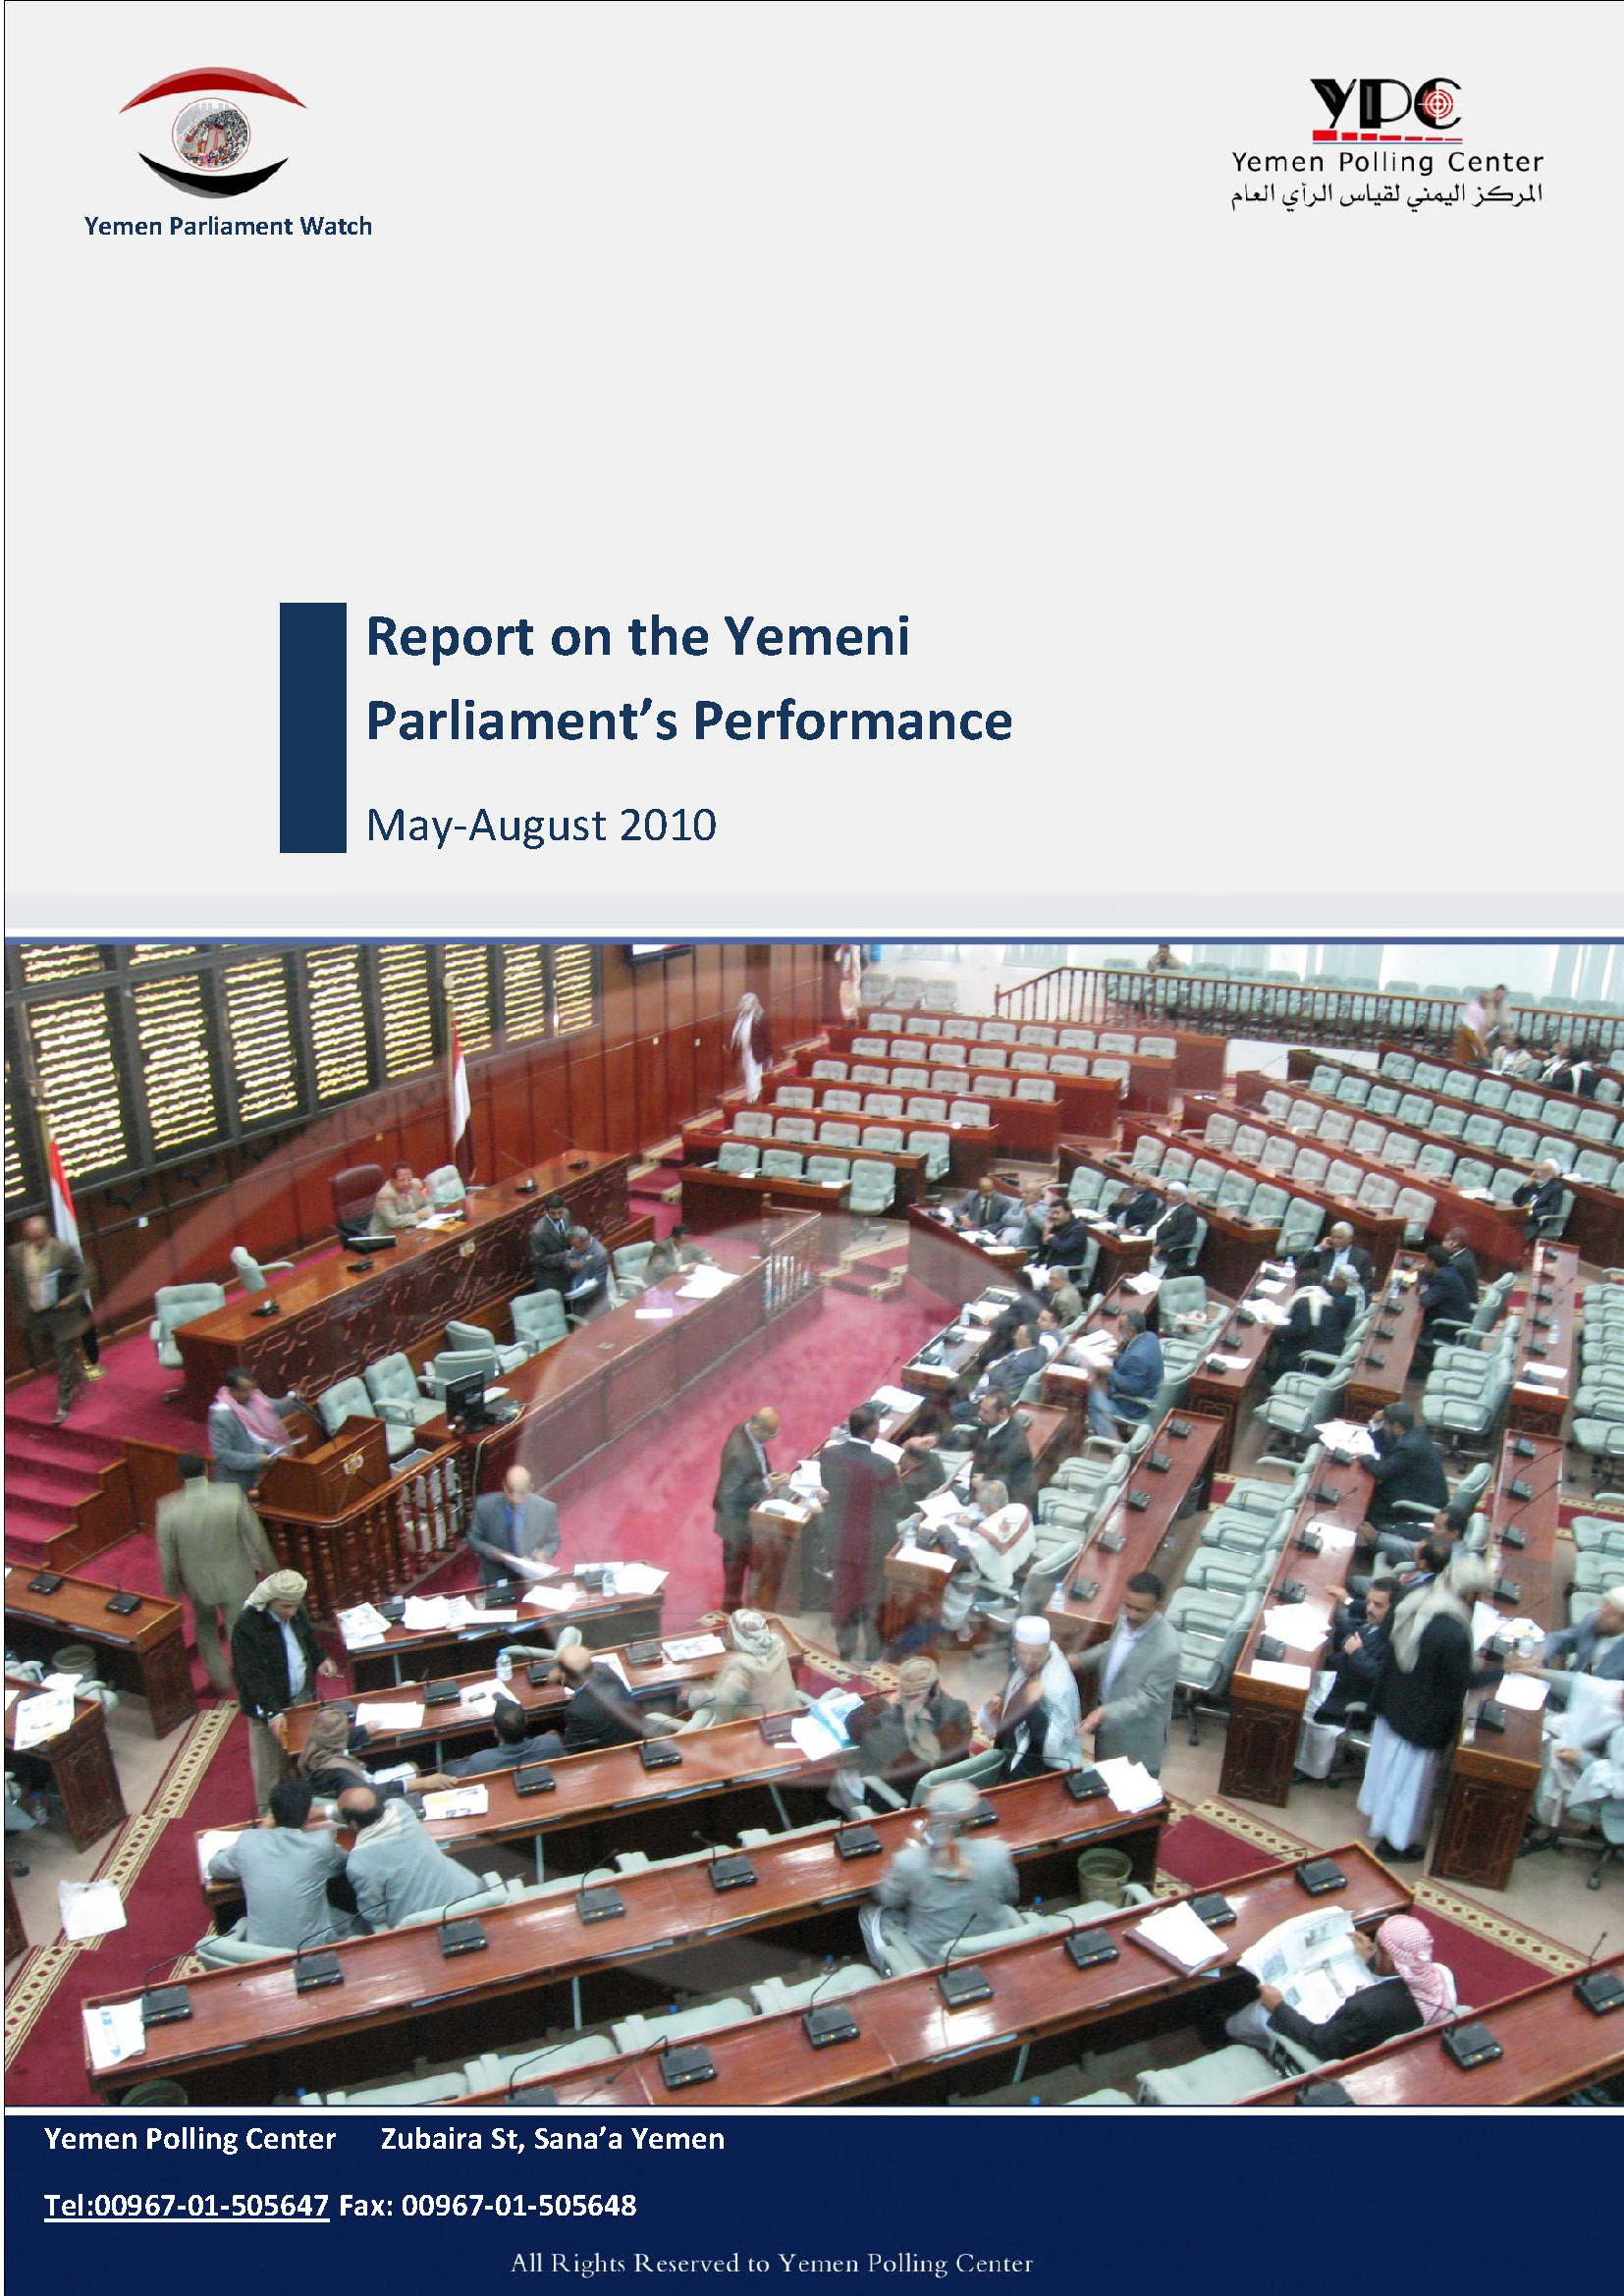 YPCPublications_Report-on-the-Yemeni-Parliament’s-Performance-May-August-2010.pdf